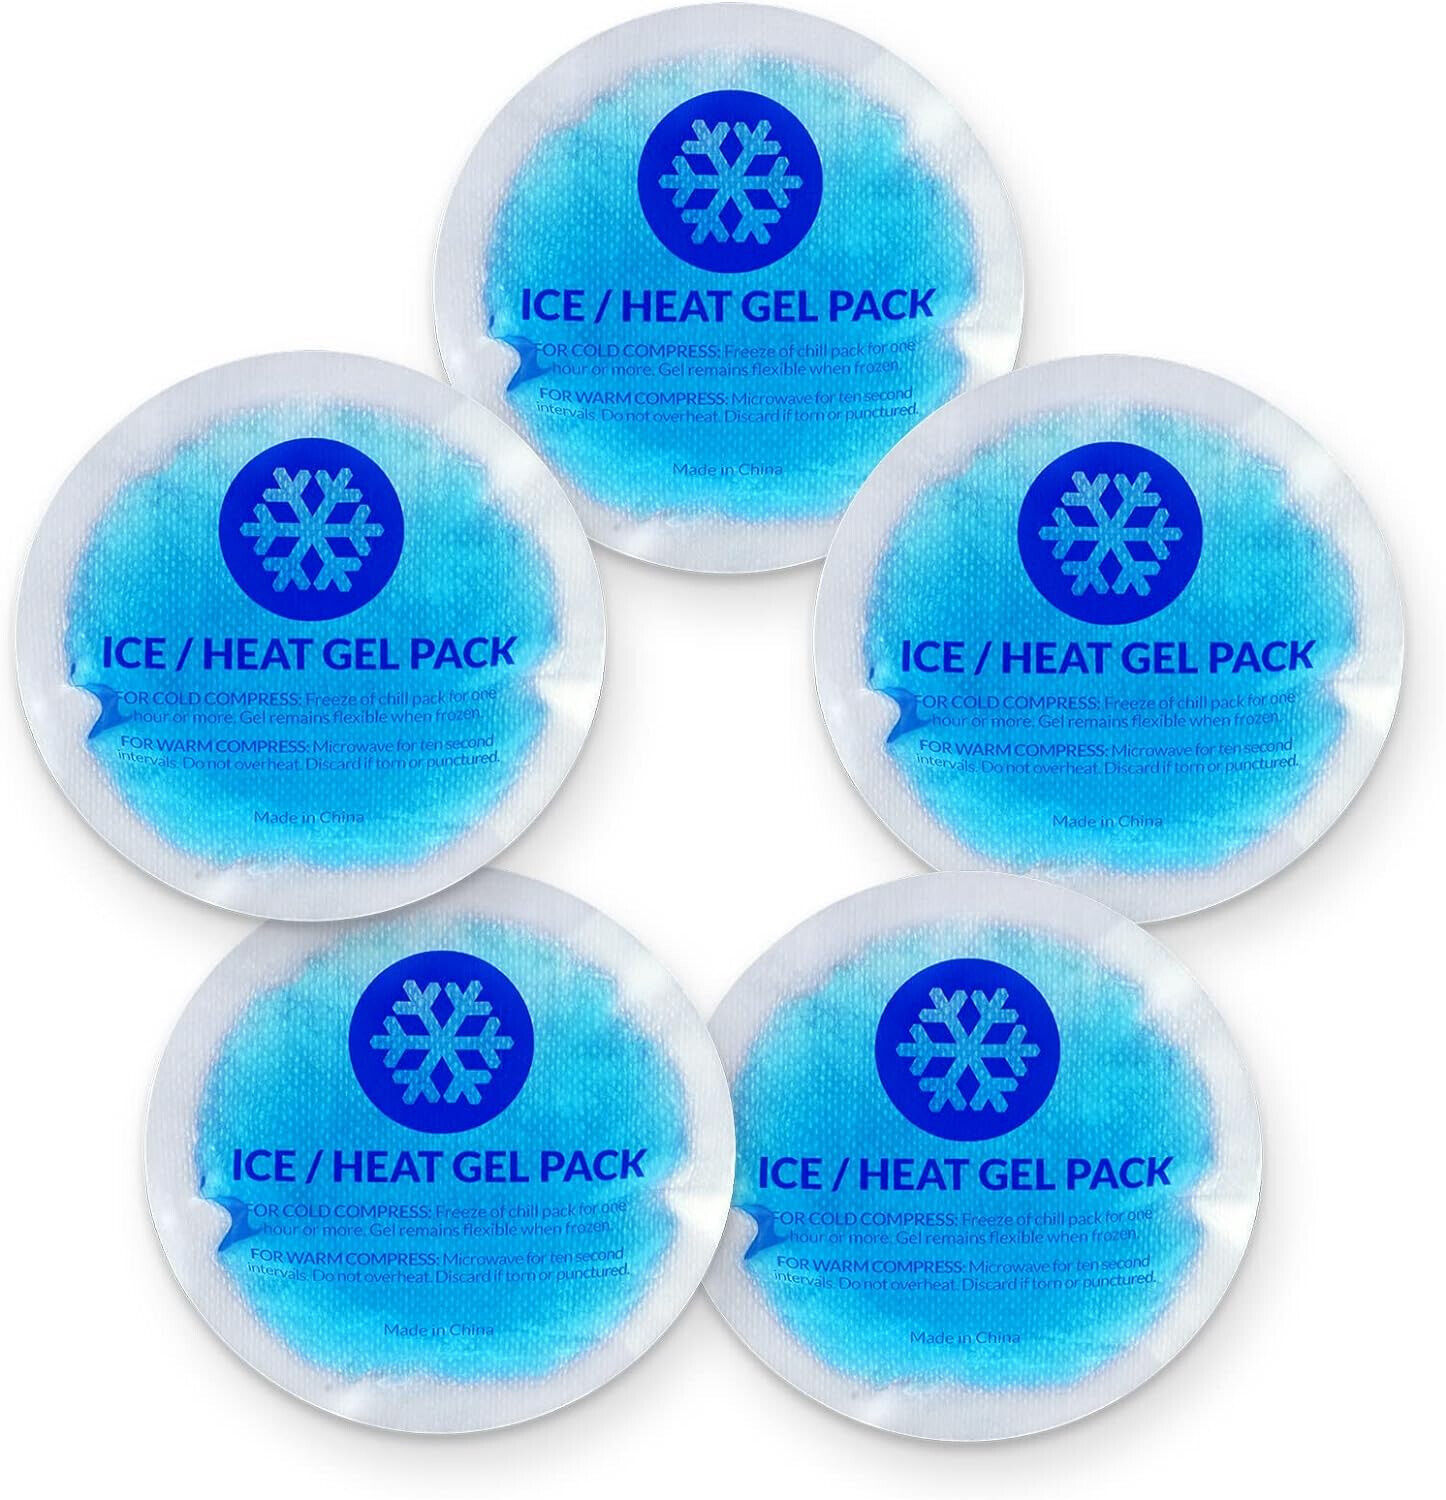 EverOne Reusable Ice/Heat Gel Pack Hot & Cold Therapeutic Use First Aid - 5 Pack